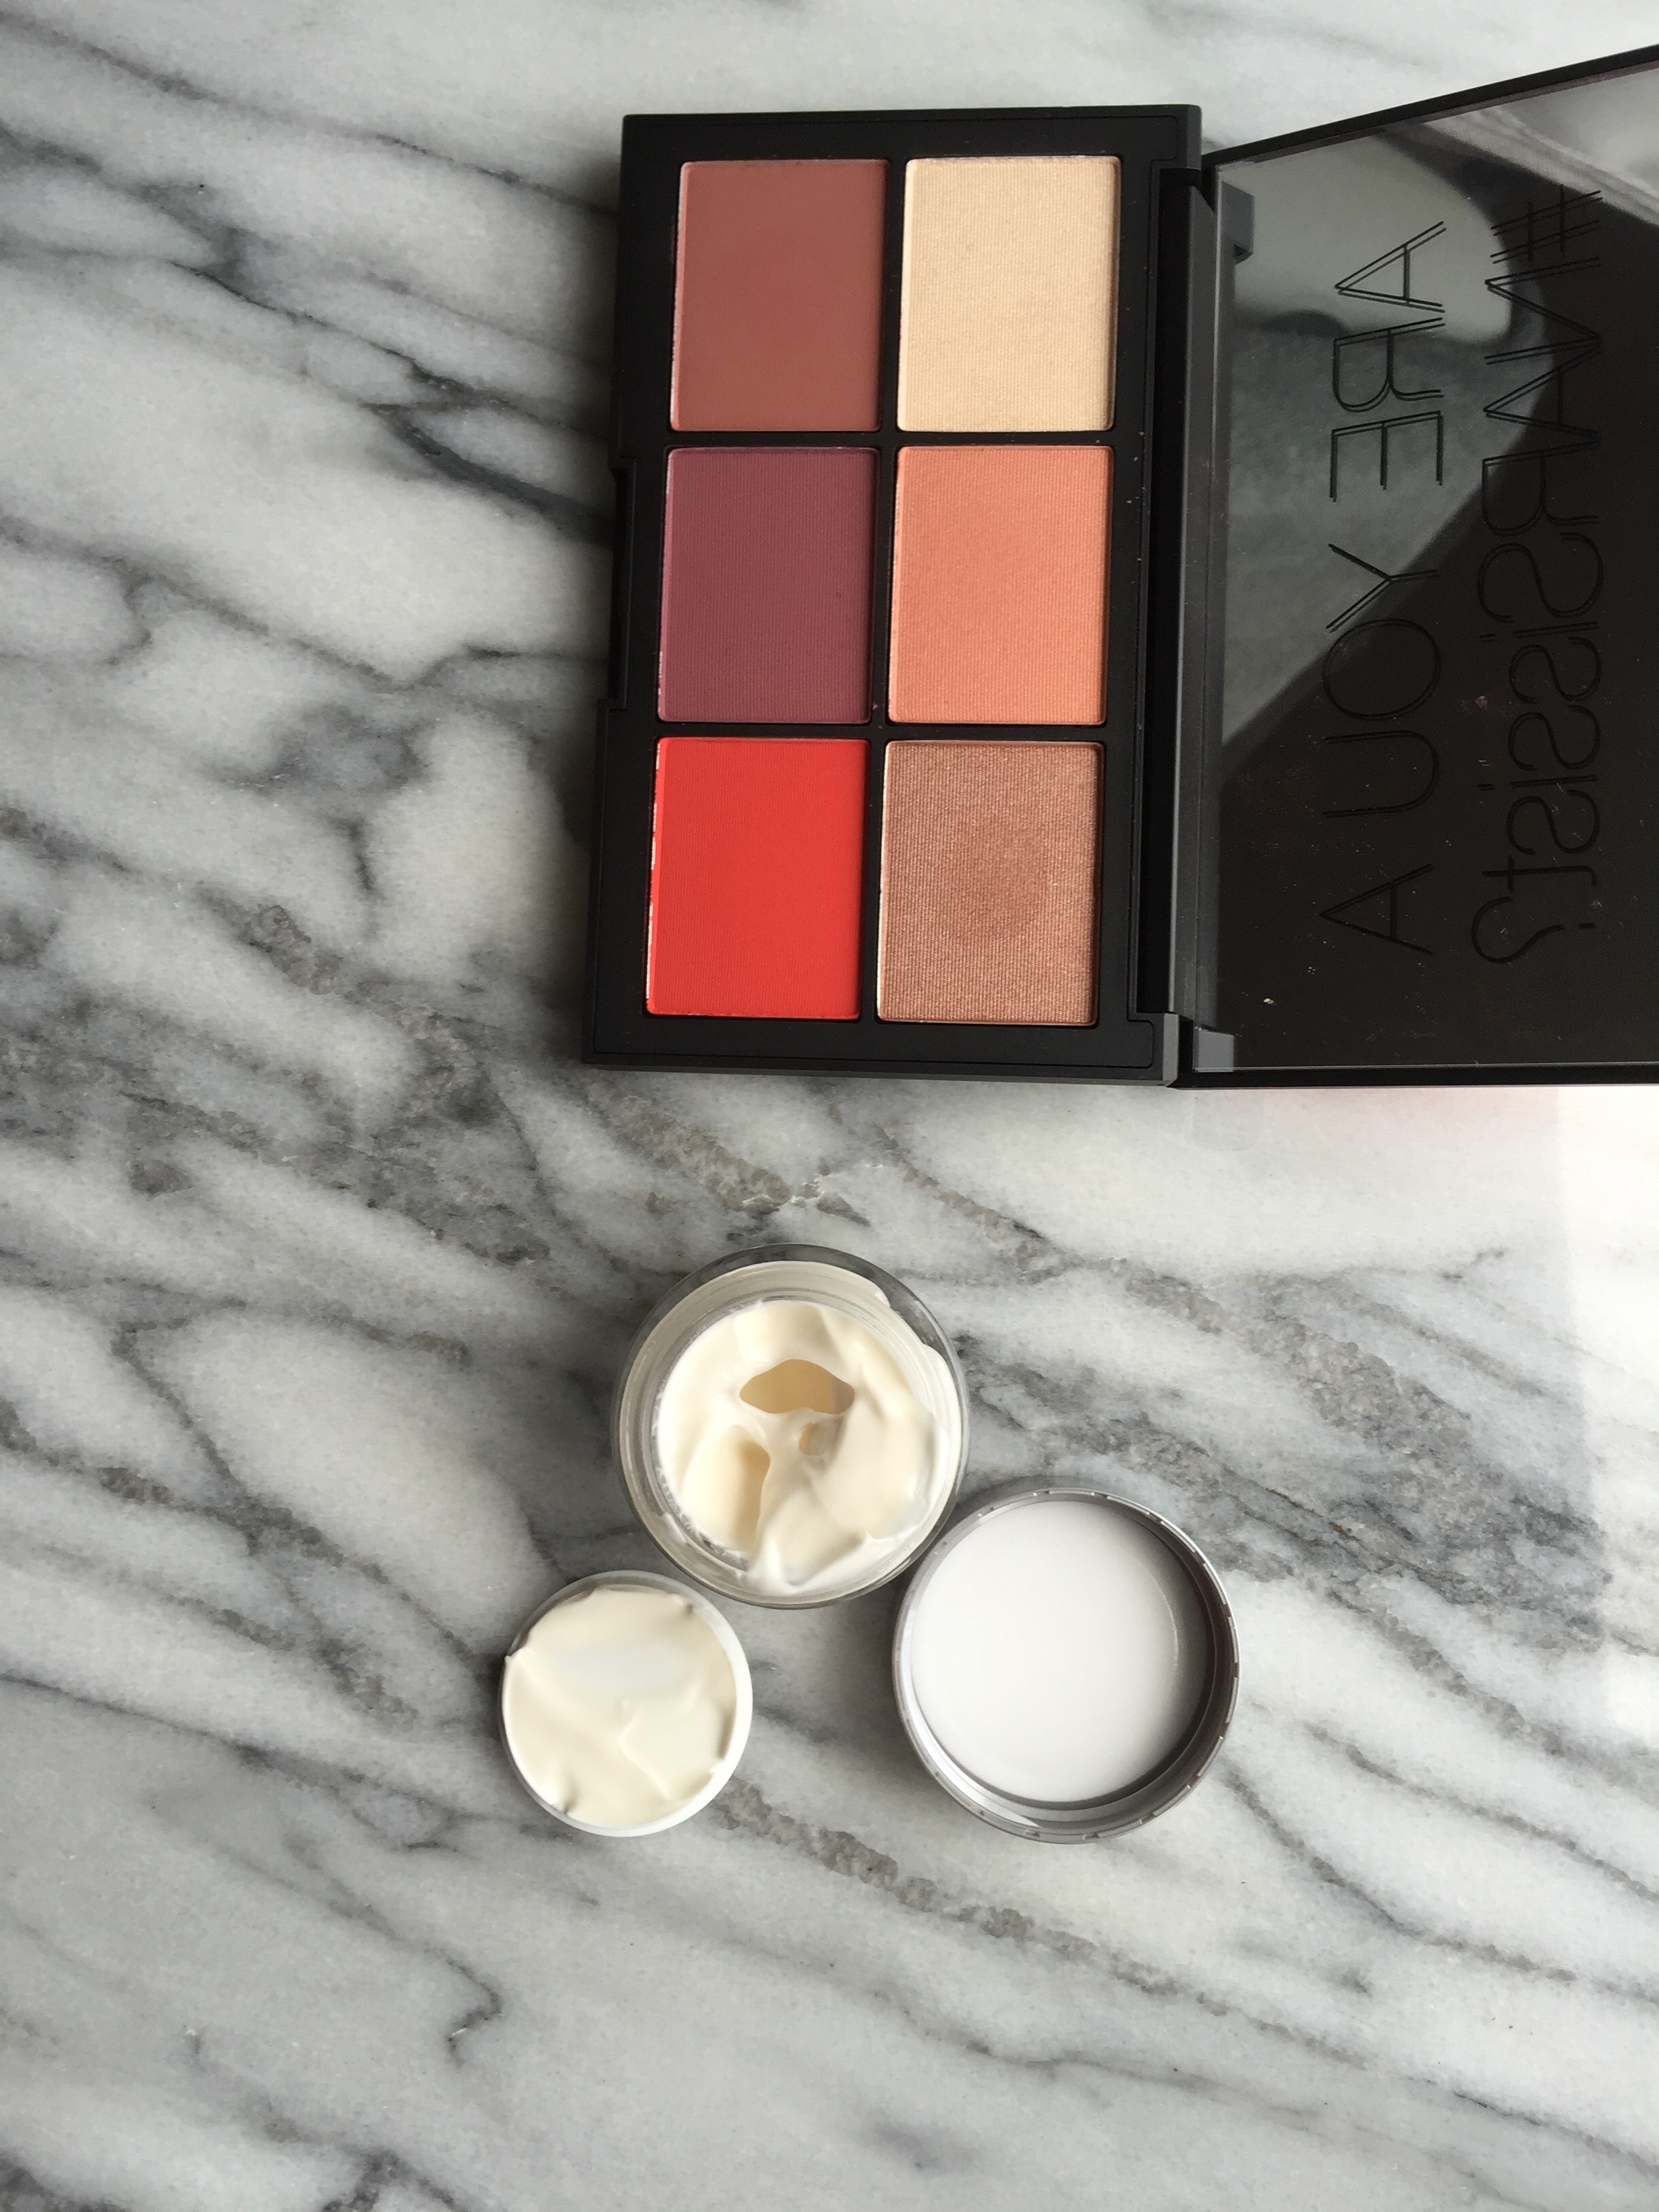 Nars Unfiltered 1 Blush Palette and Caudalie Face Cream